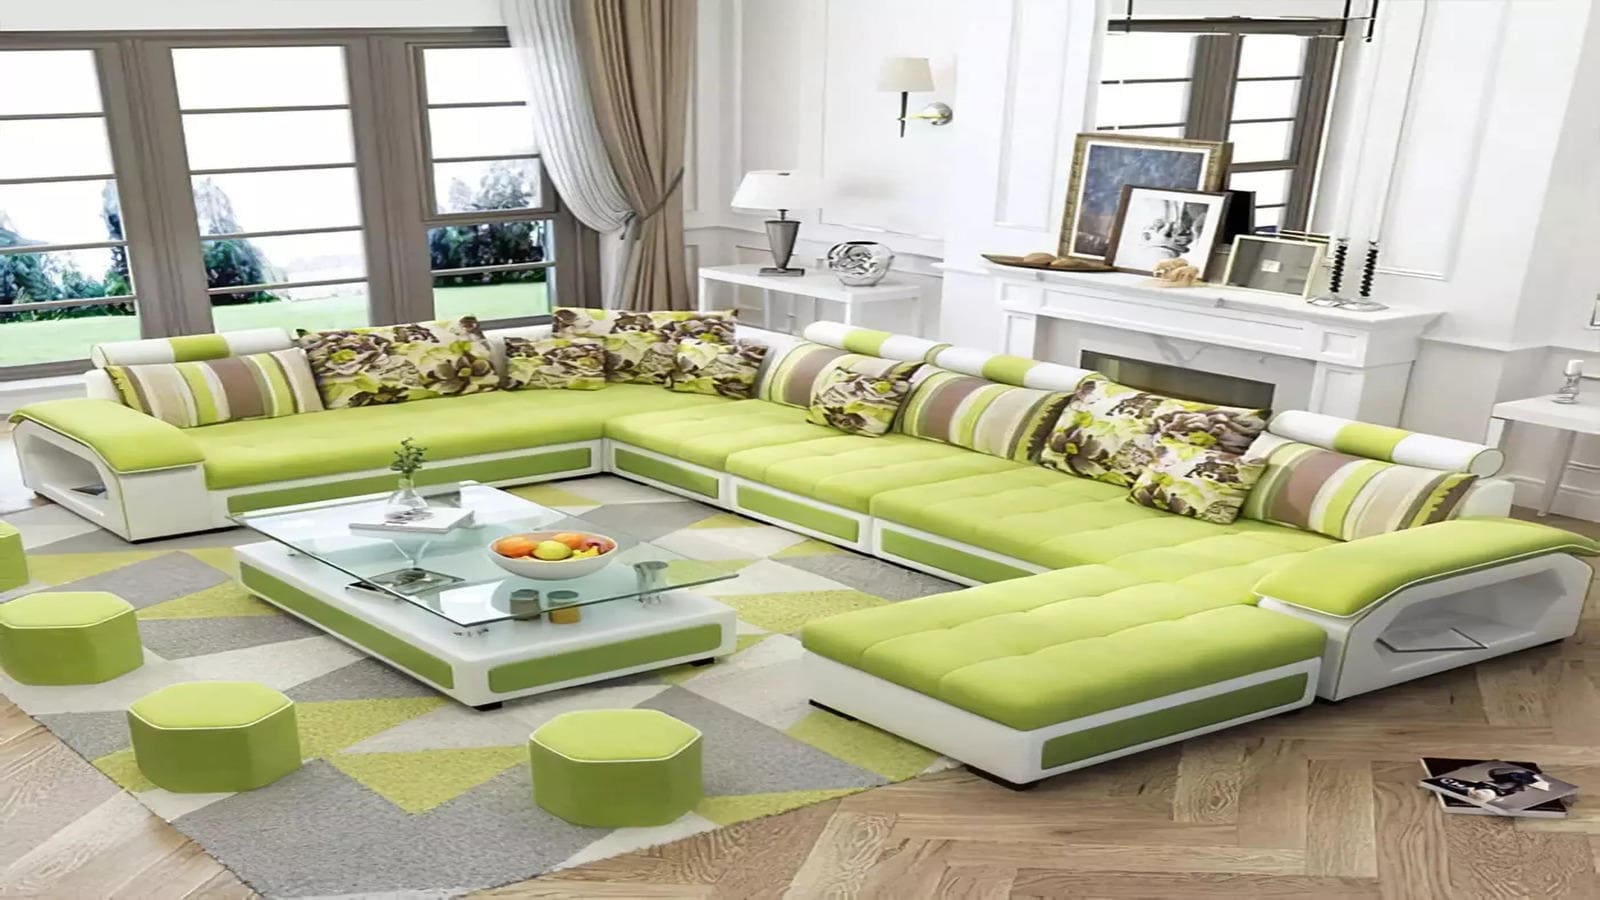 Transform Your Living Room with Stunning L-Shaped Sofa Ideas